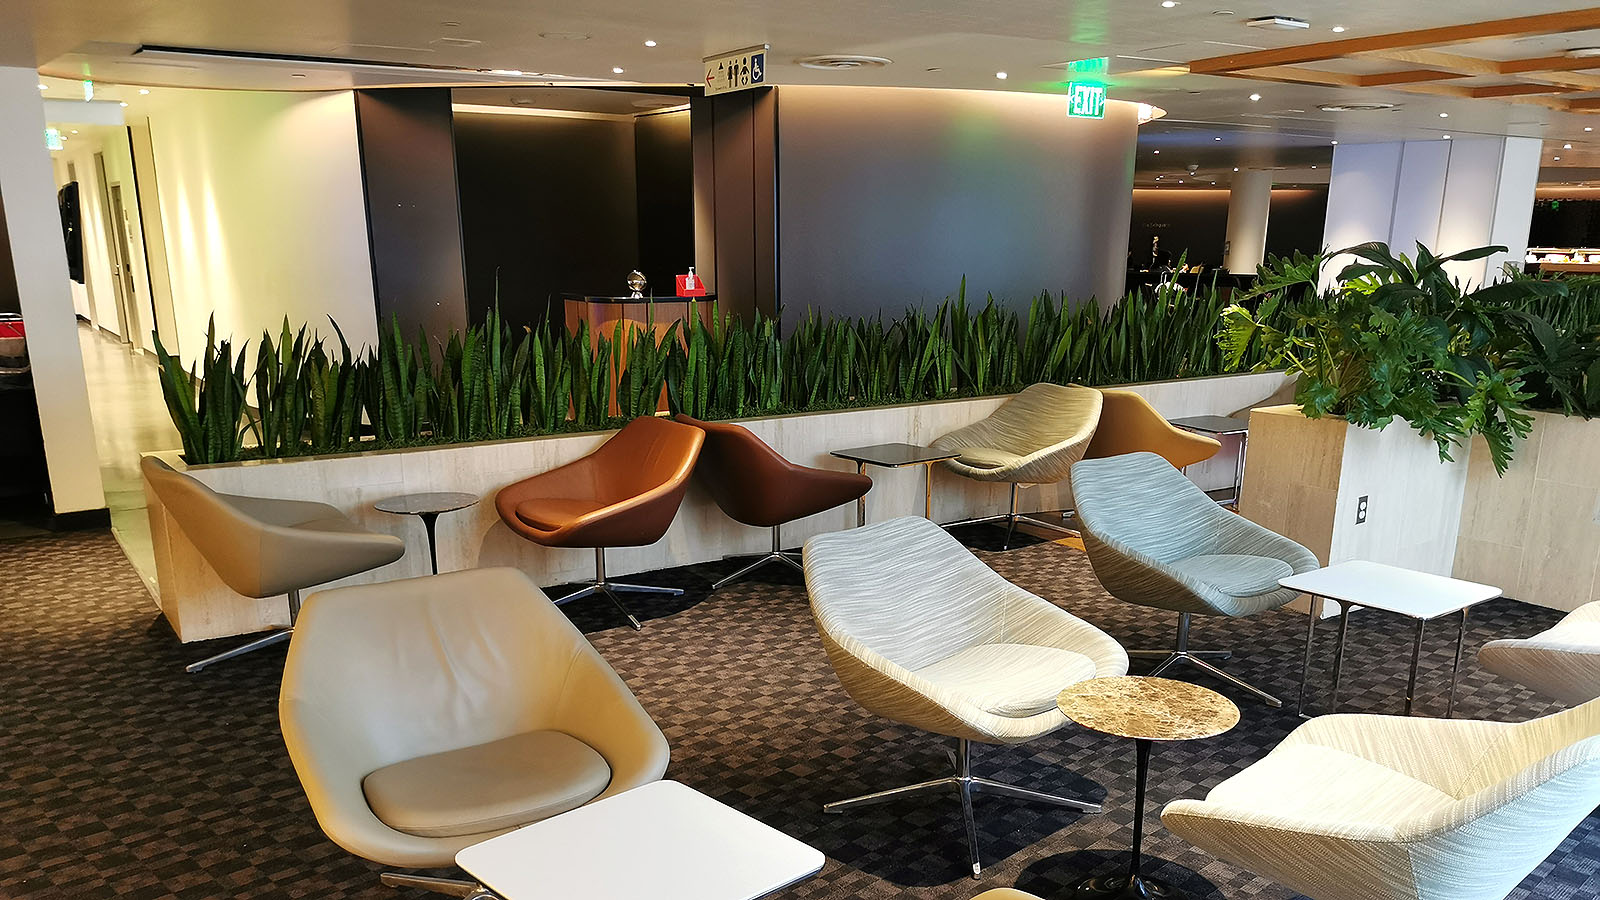 Chairs in the Qantas International Business Lounge in Los Angeles